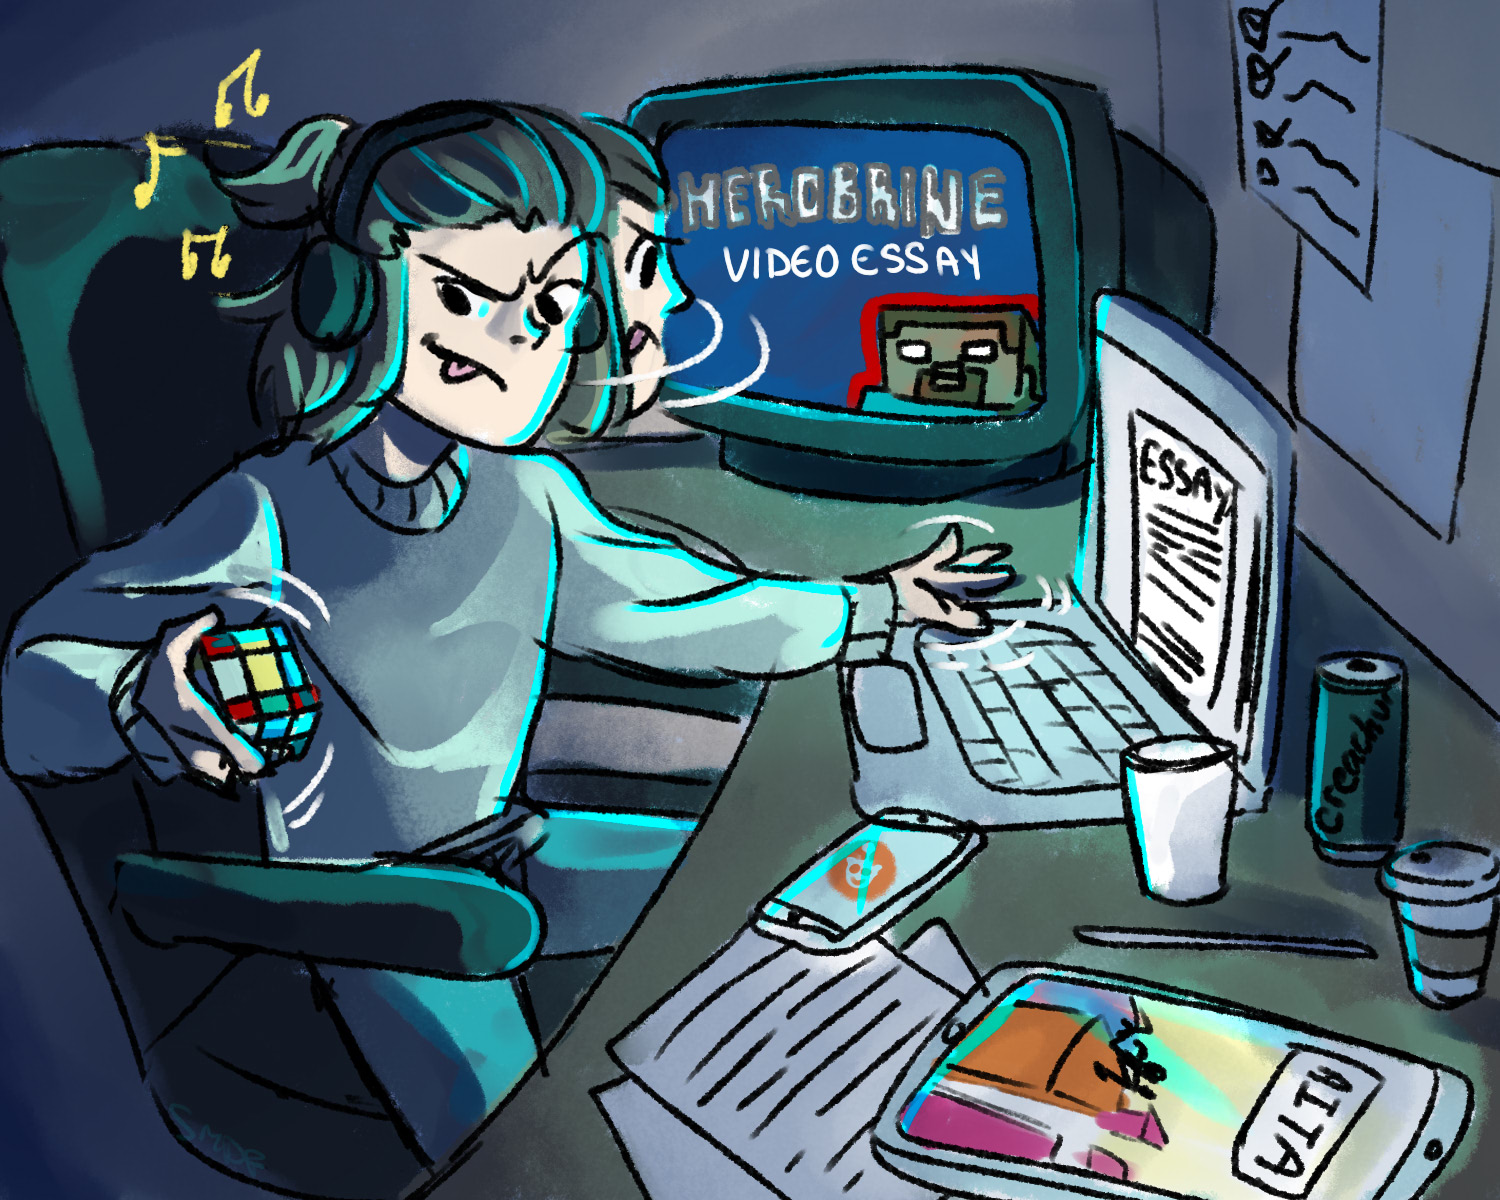 Someone writing an essay, looking at four screens, and multitasking. Illustration by Sie Douglas-Fish.